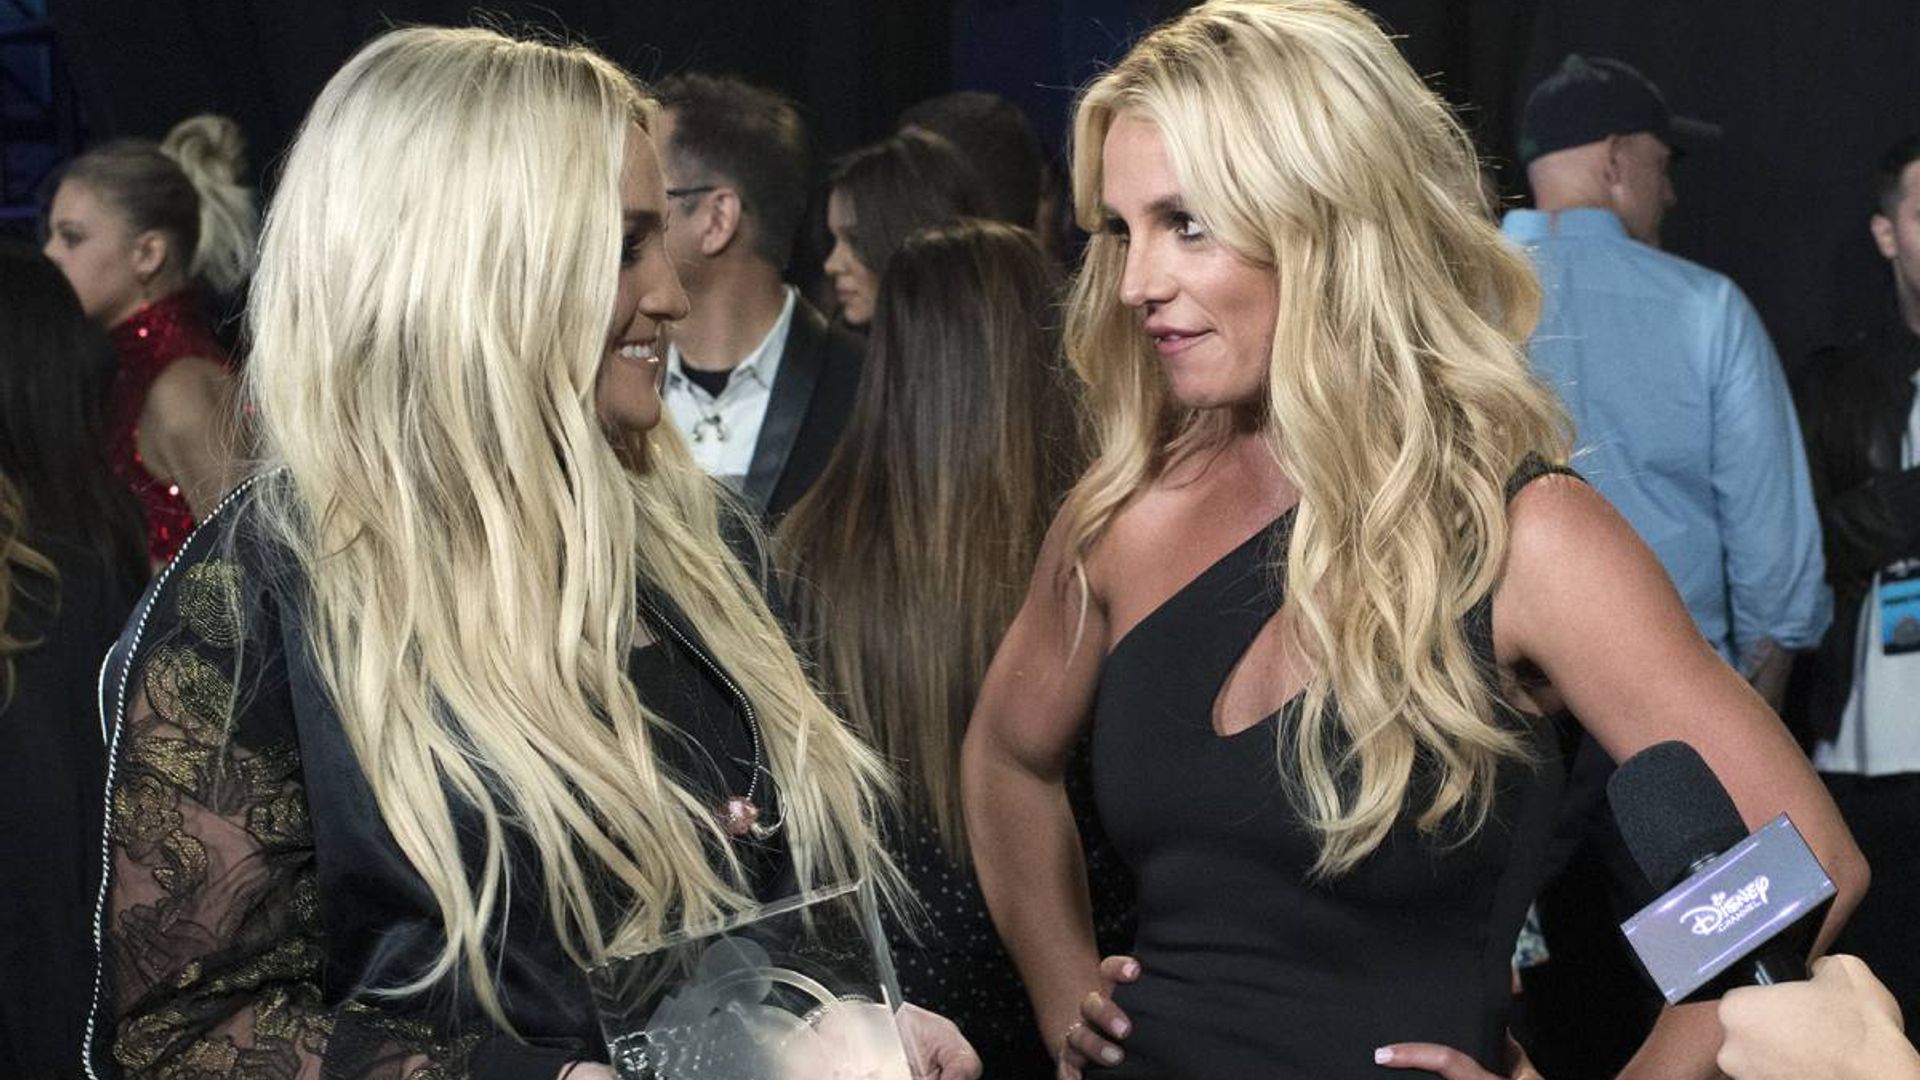 Britney Spears' sister Jamie Lynn Spears reacts to star's comments on social media